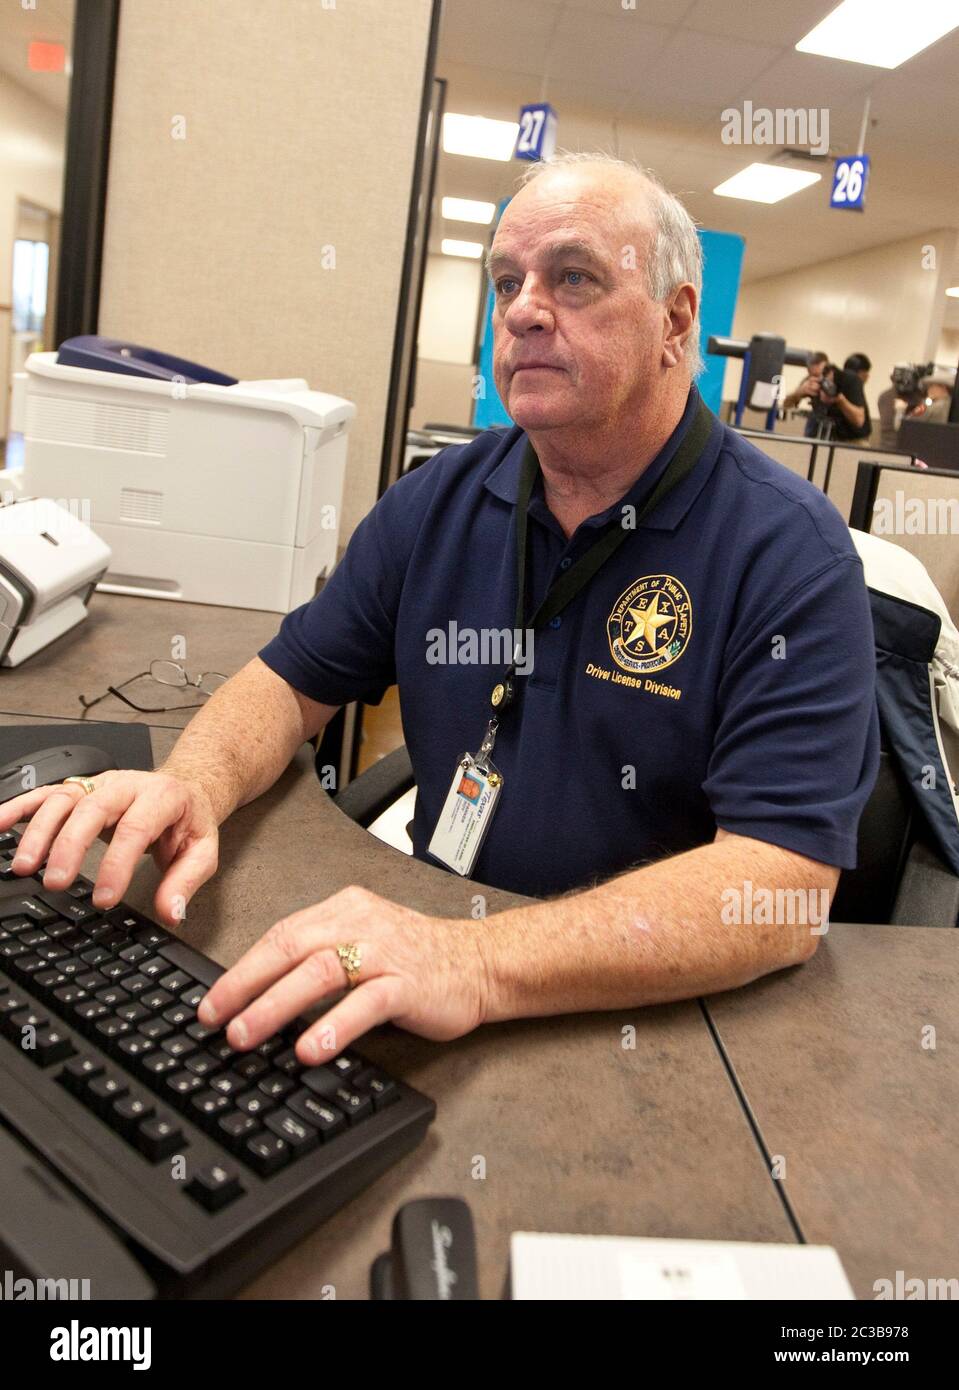 Pflugerville, Texas USA, October 2012: Employee wears a polo-style shirt emblazoned with the Texas state seal while working at the new Texas Department of Public Safety mega driver's license center.  ©MKC / Daemmrich Photos Stock Photo